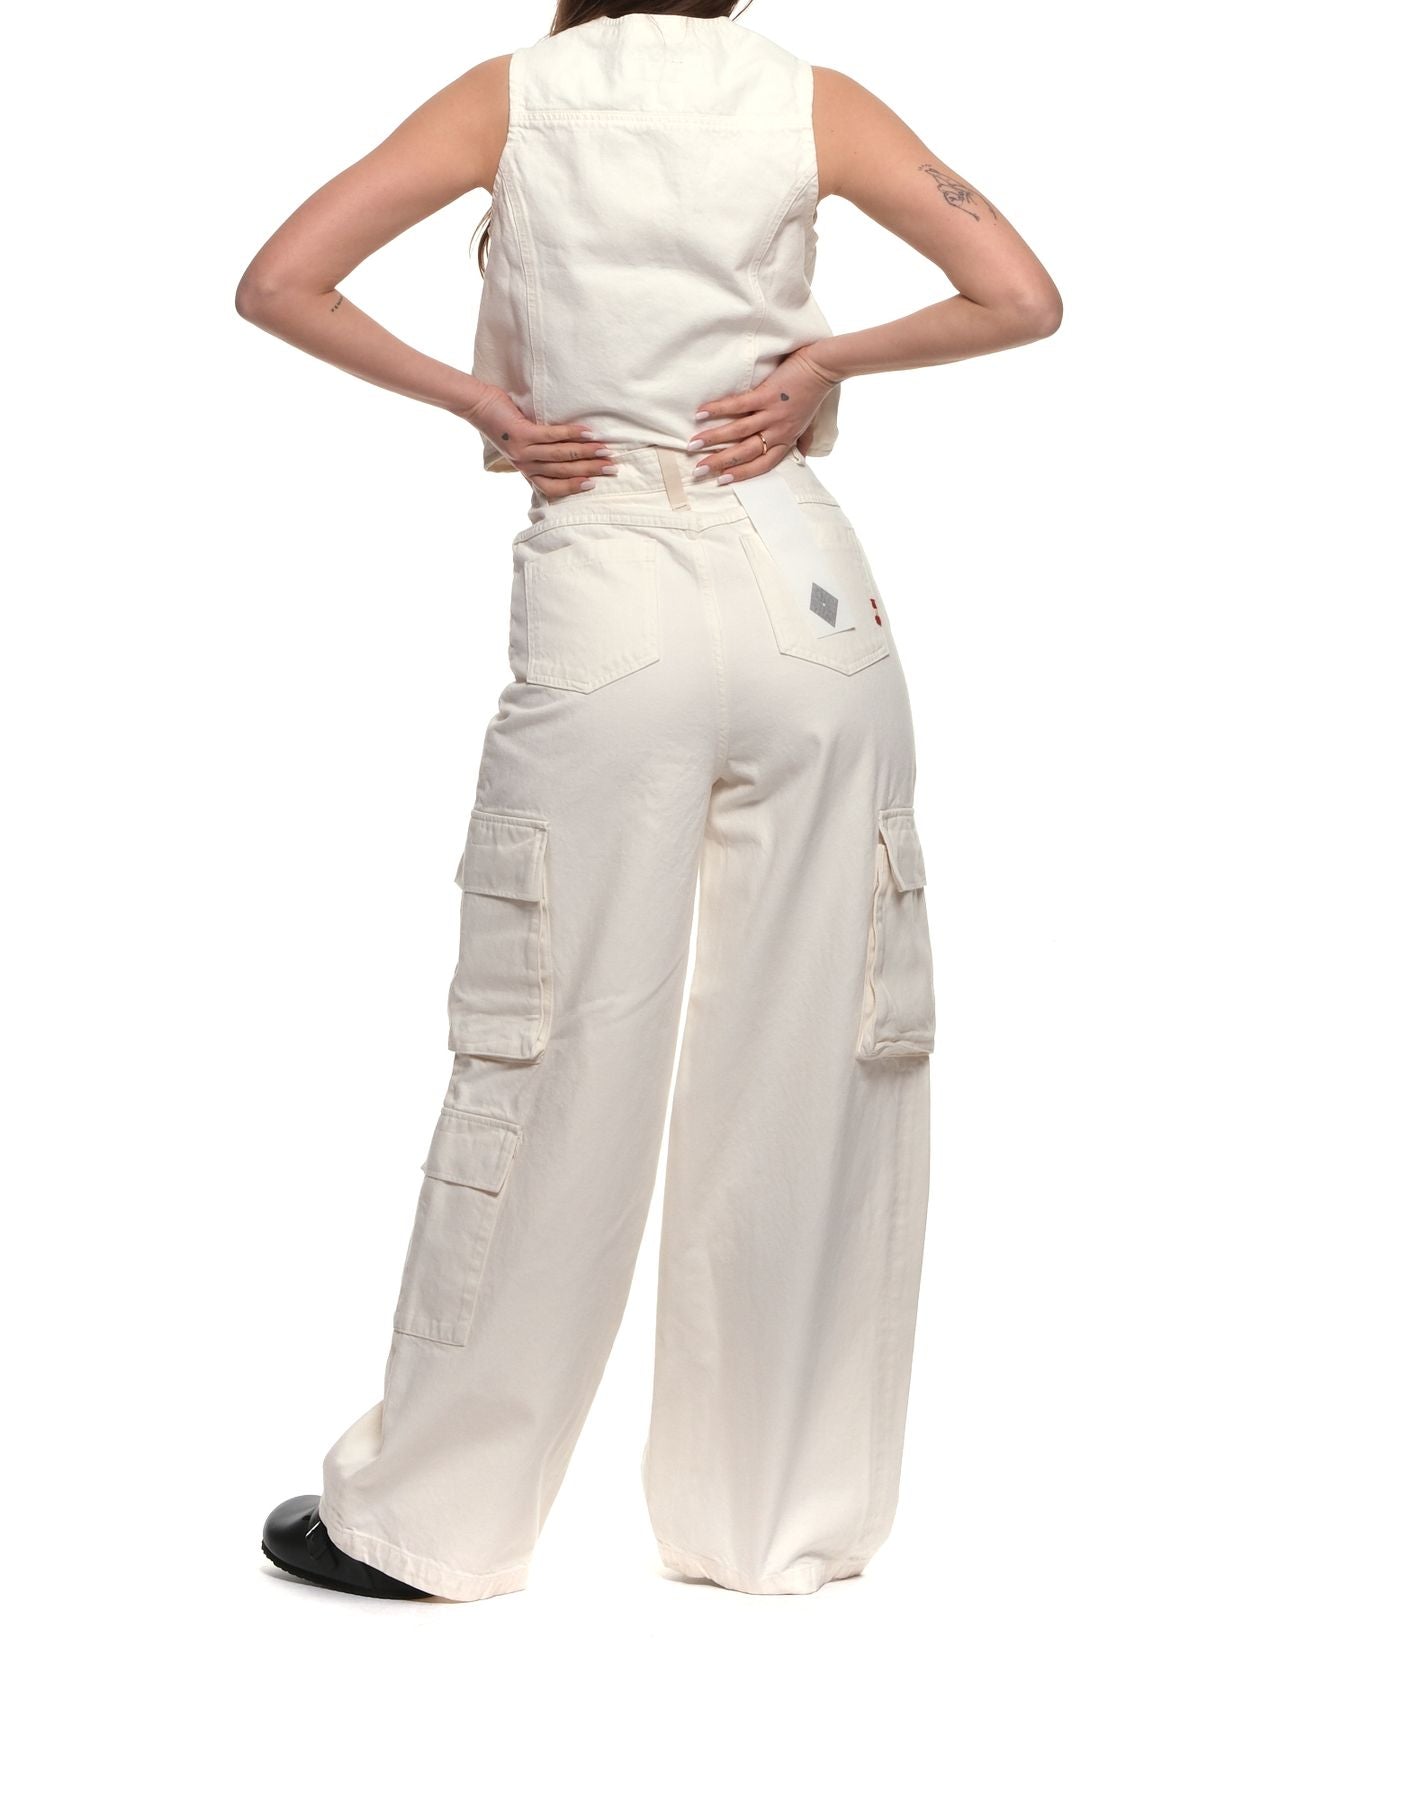 Jeans for woman AMD065P3200111 WHITE Amish